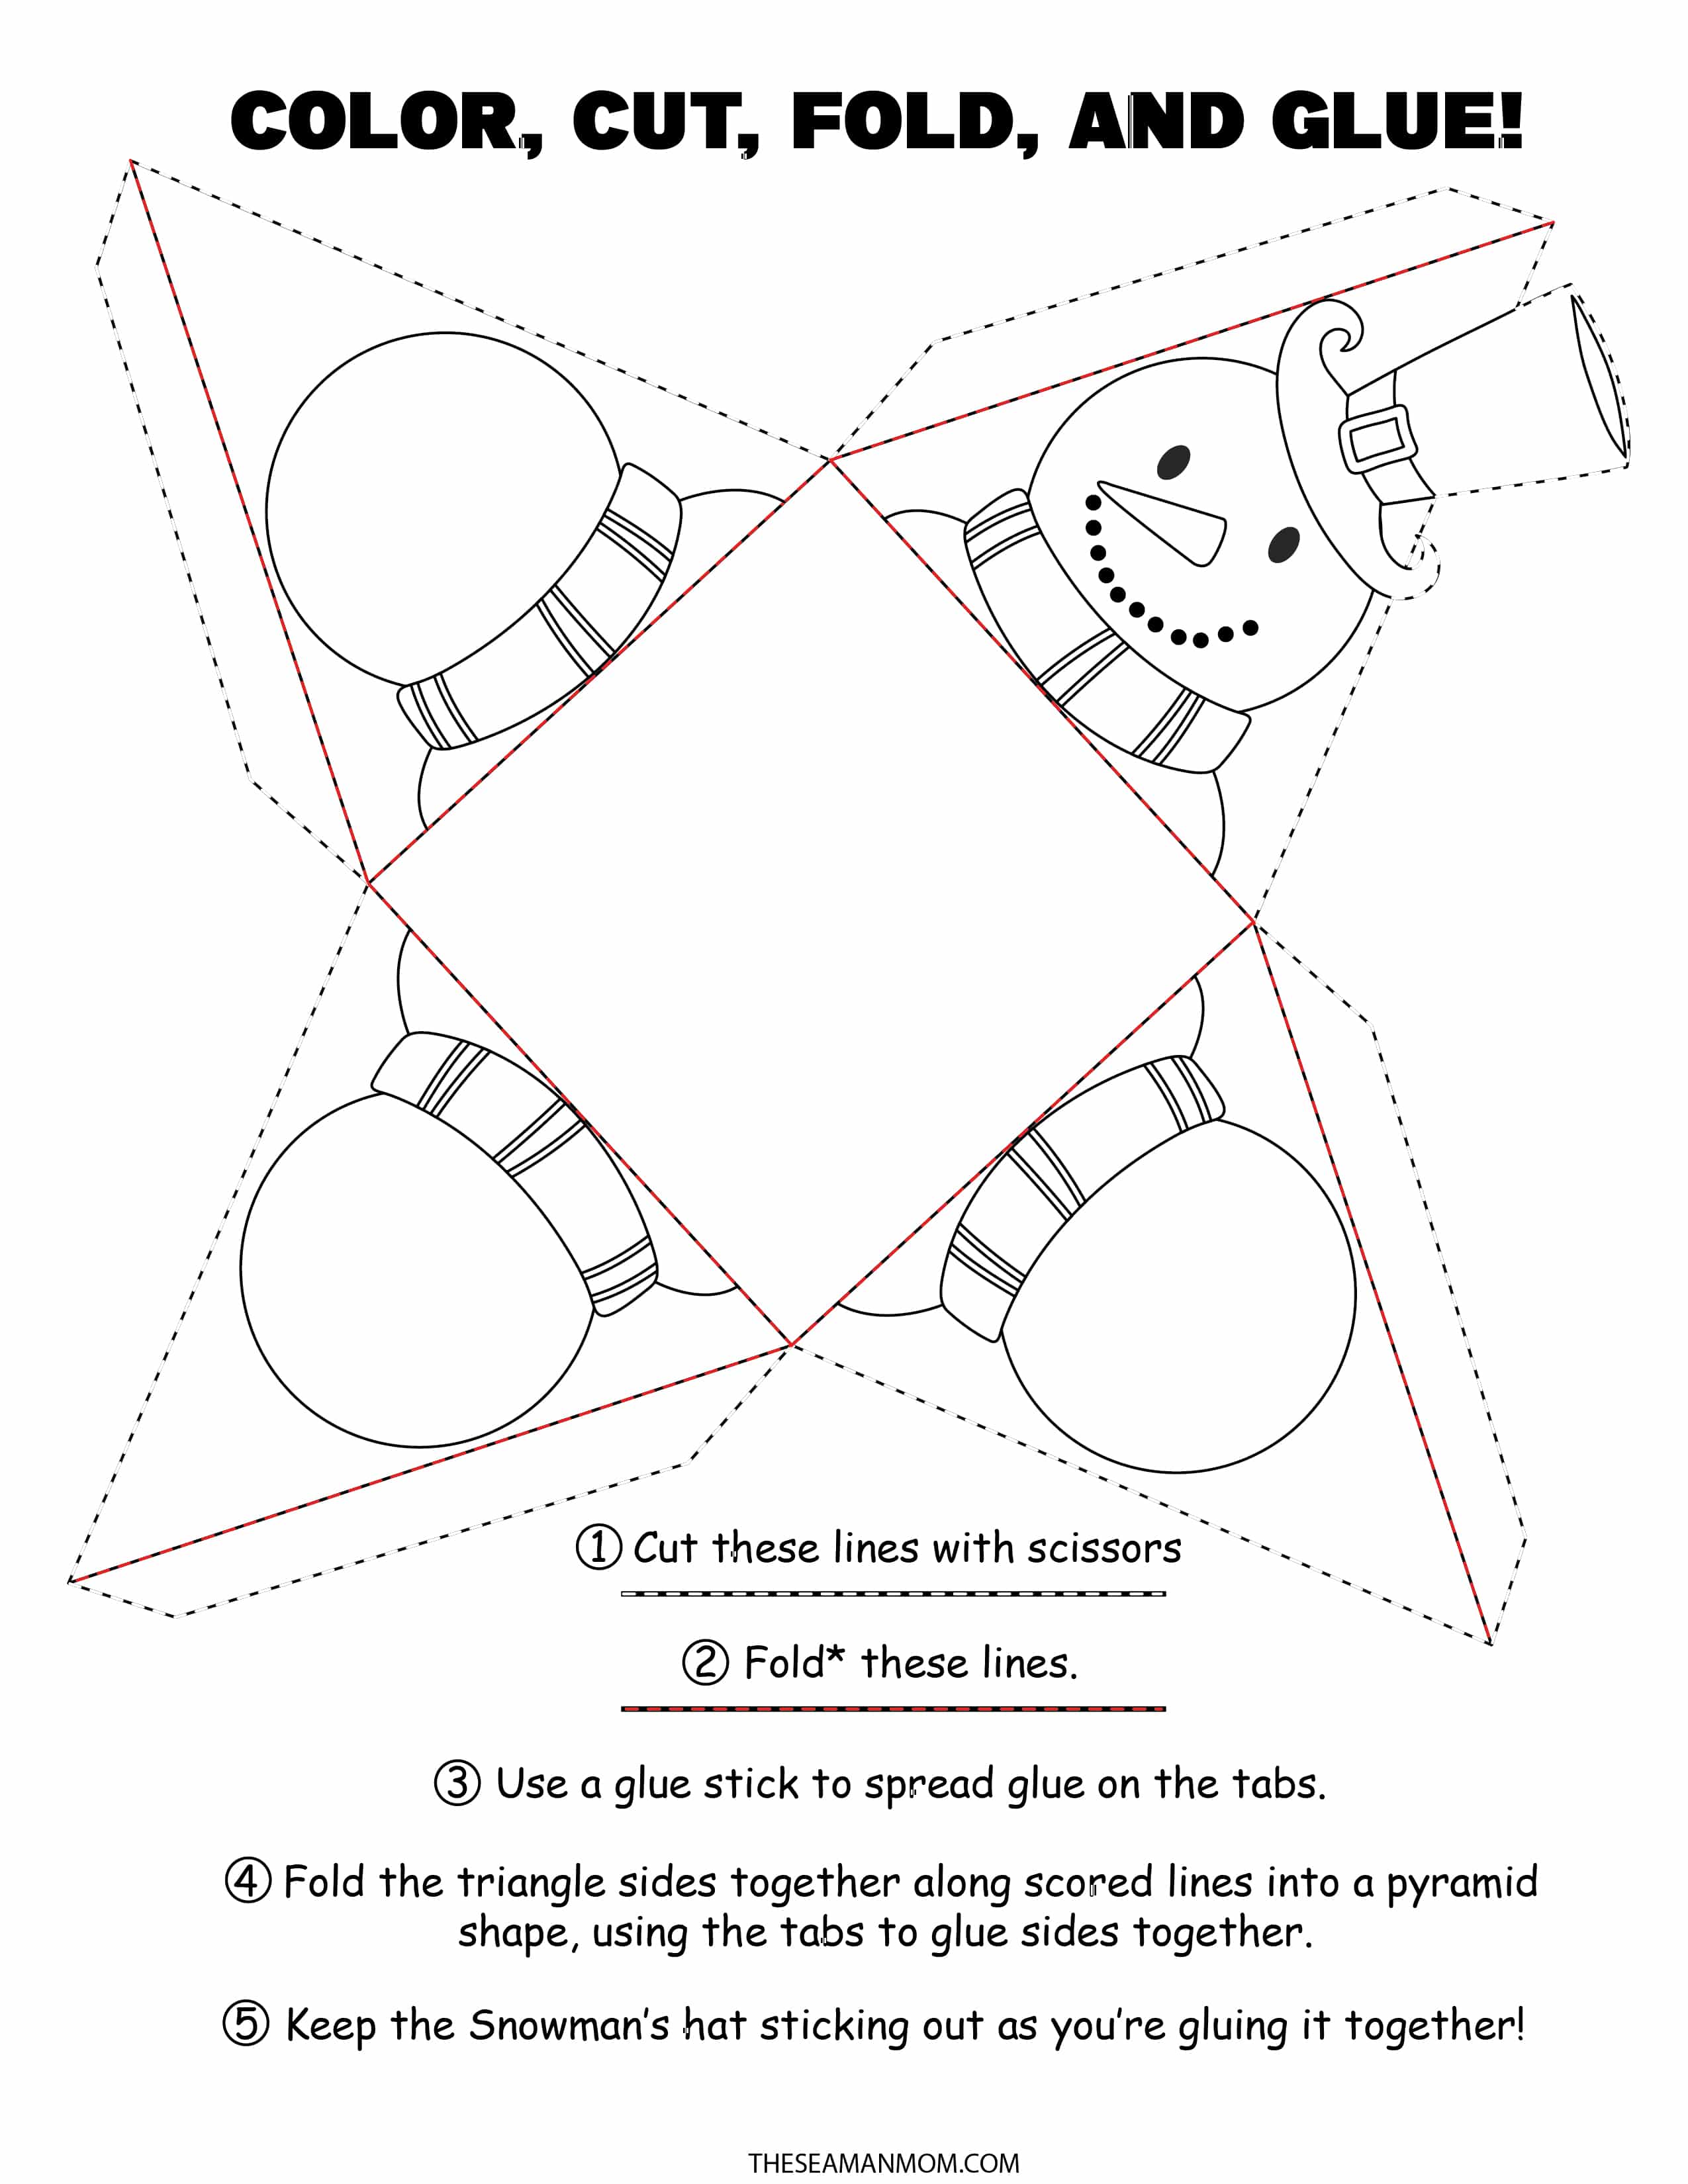 Printable Snowman ornaments to color, cut, fold and glue and make your own tree ornaments